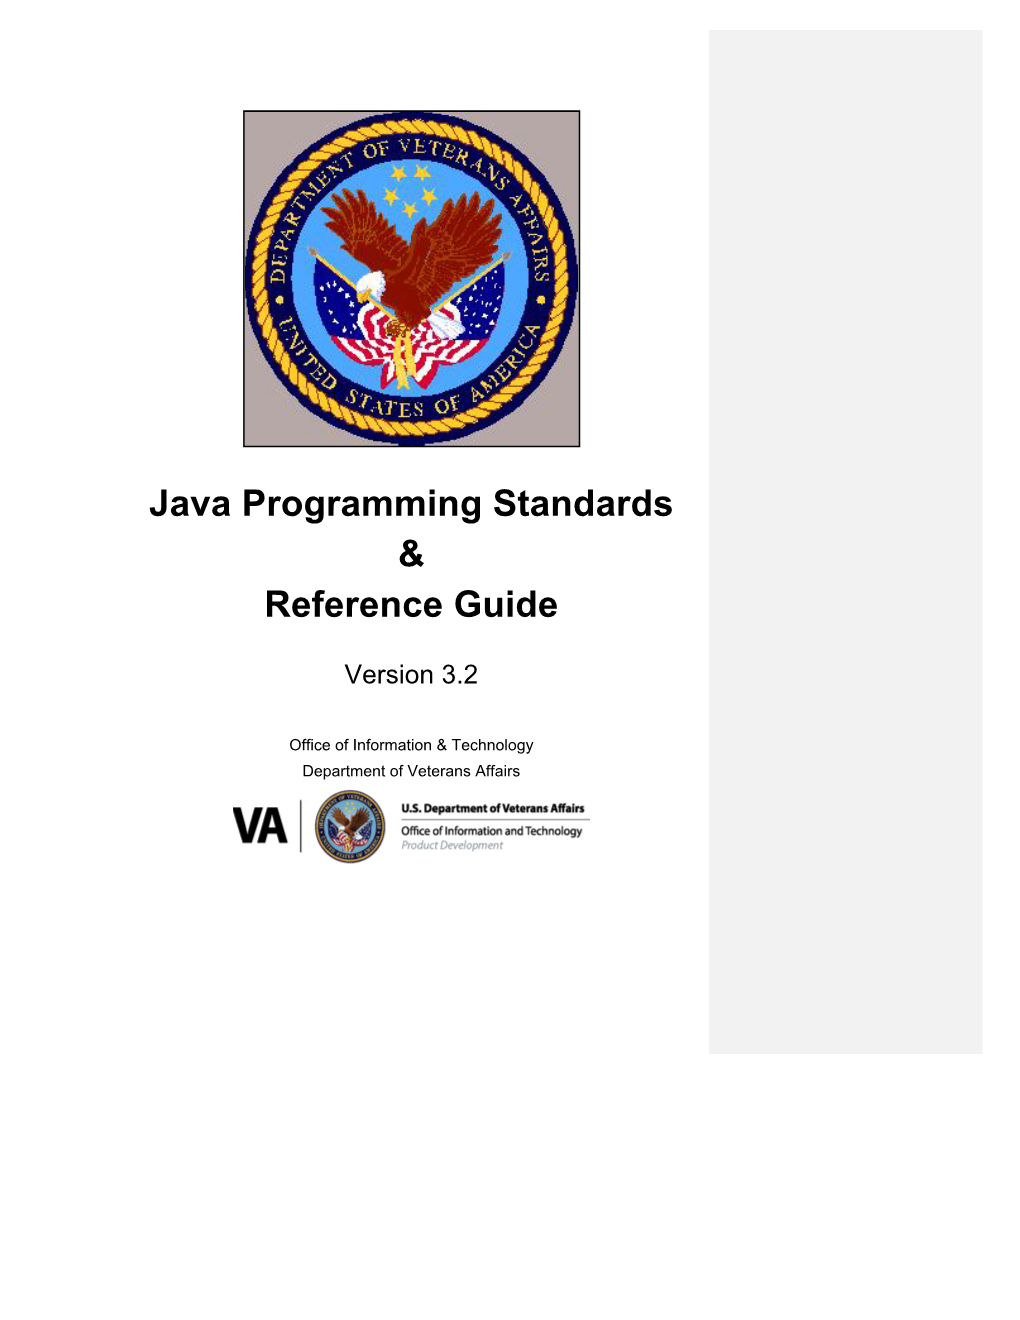 Java Programming Standards & Reference Guide